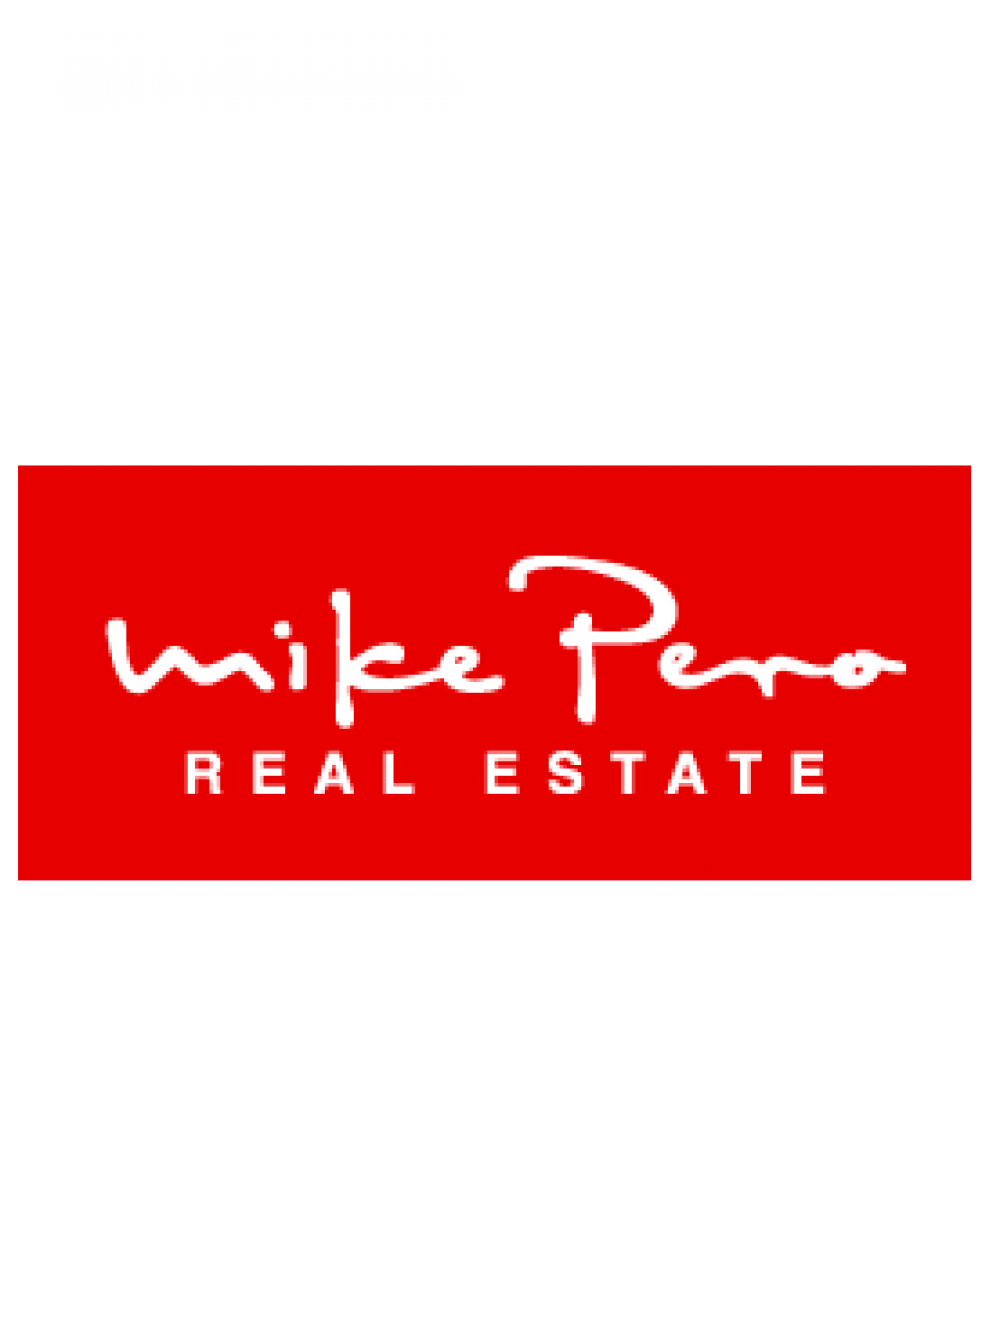 Cache Real Estate Logo - Mike Pero Real Estate Tauranga | Most Trusted